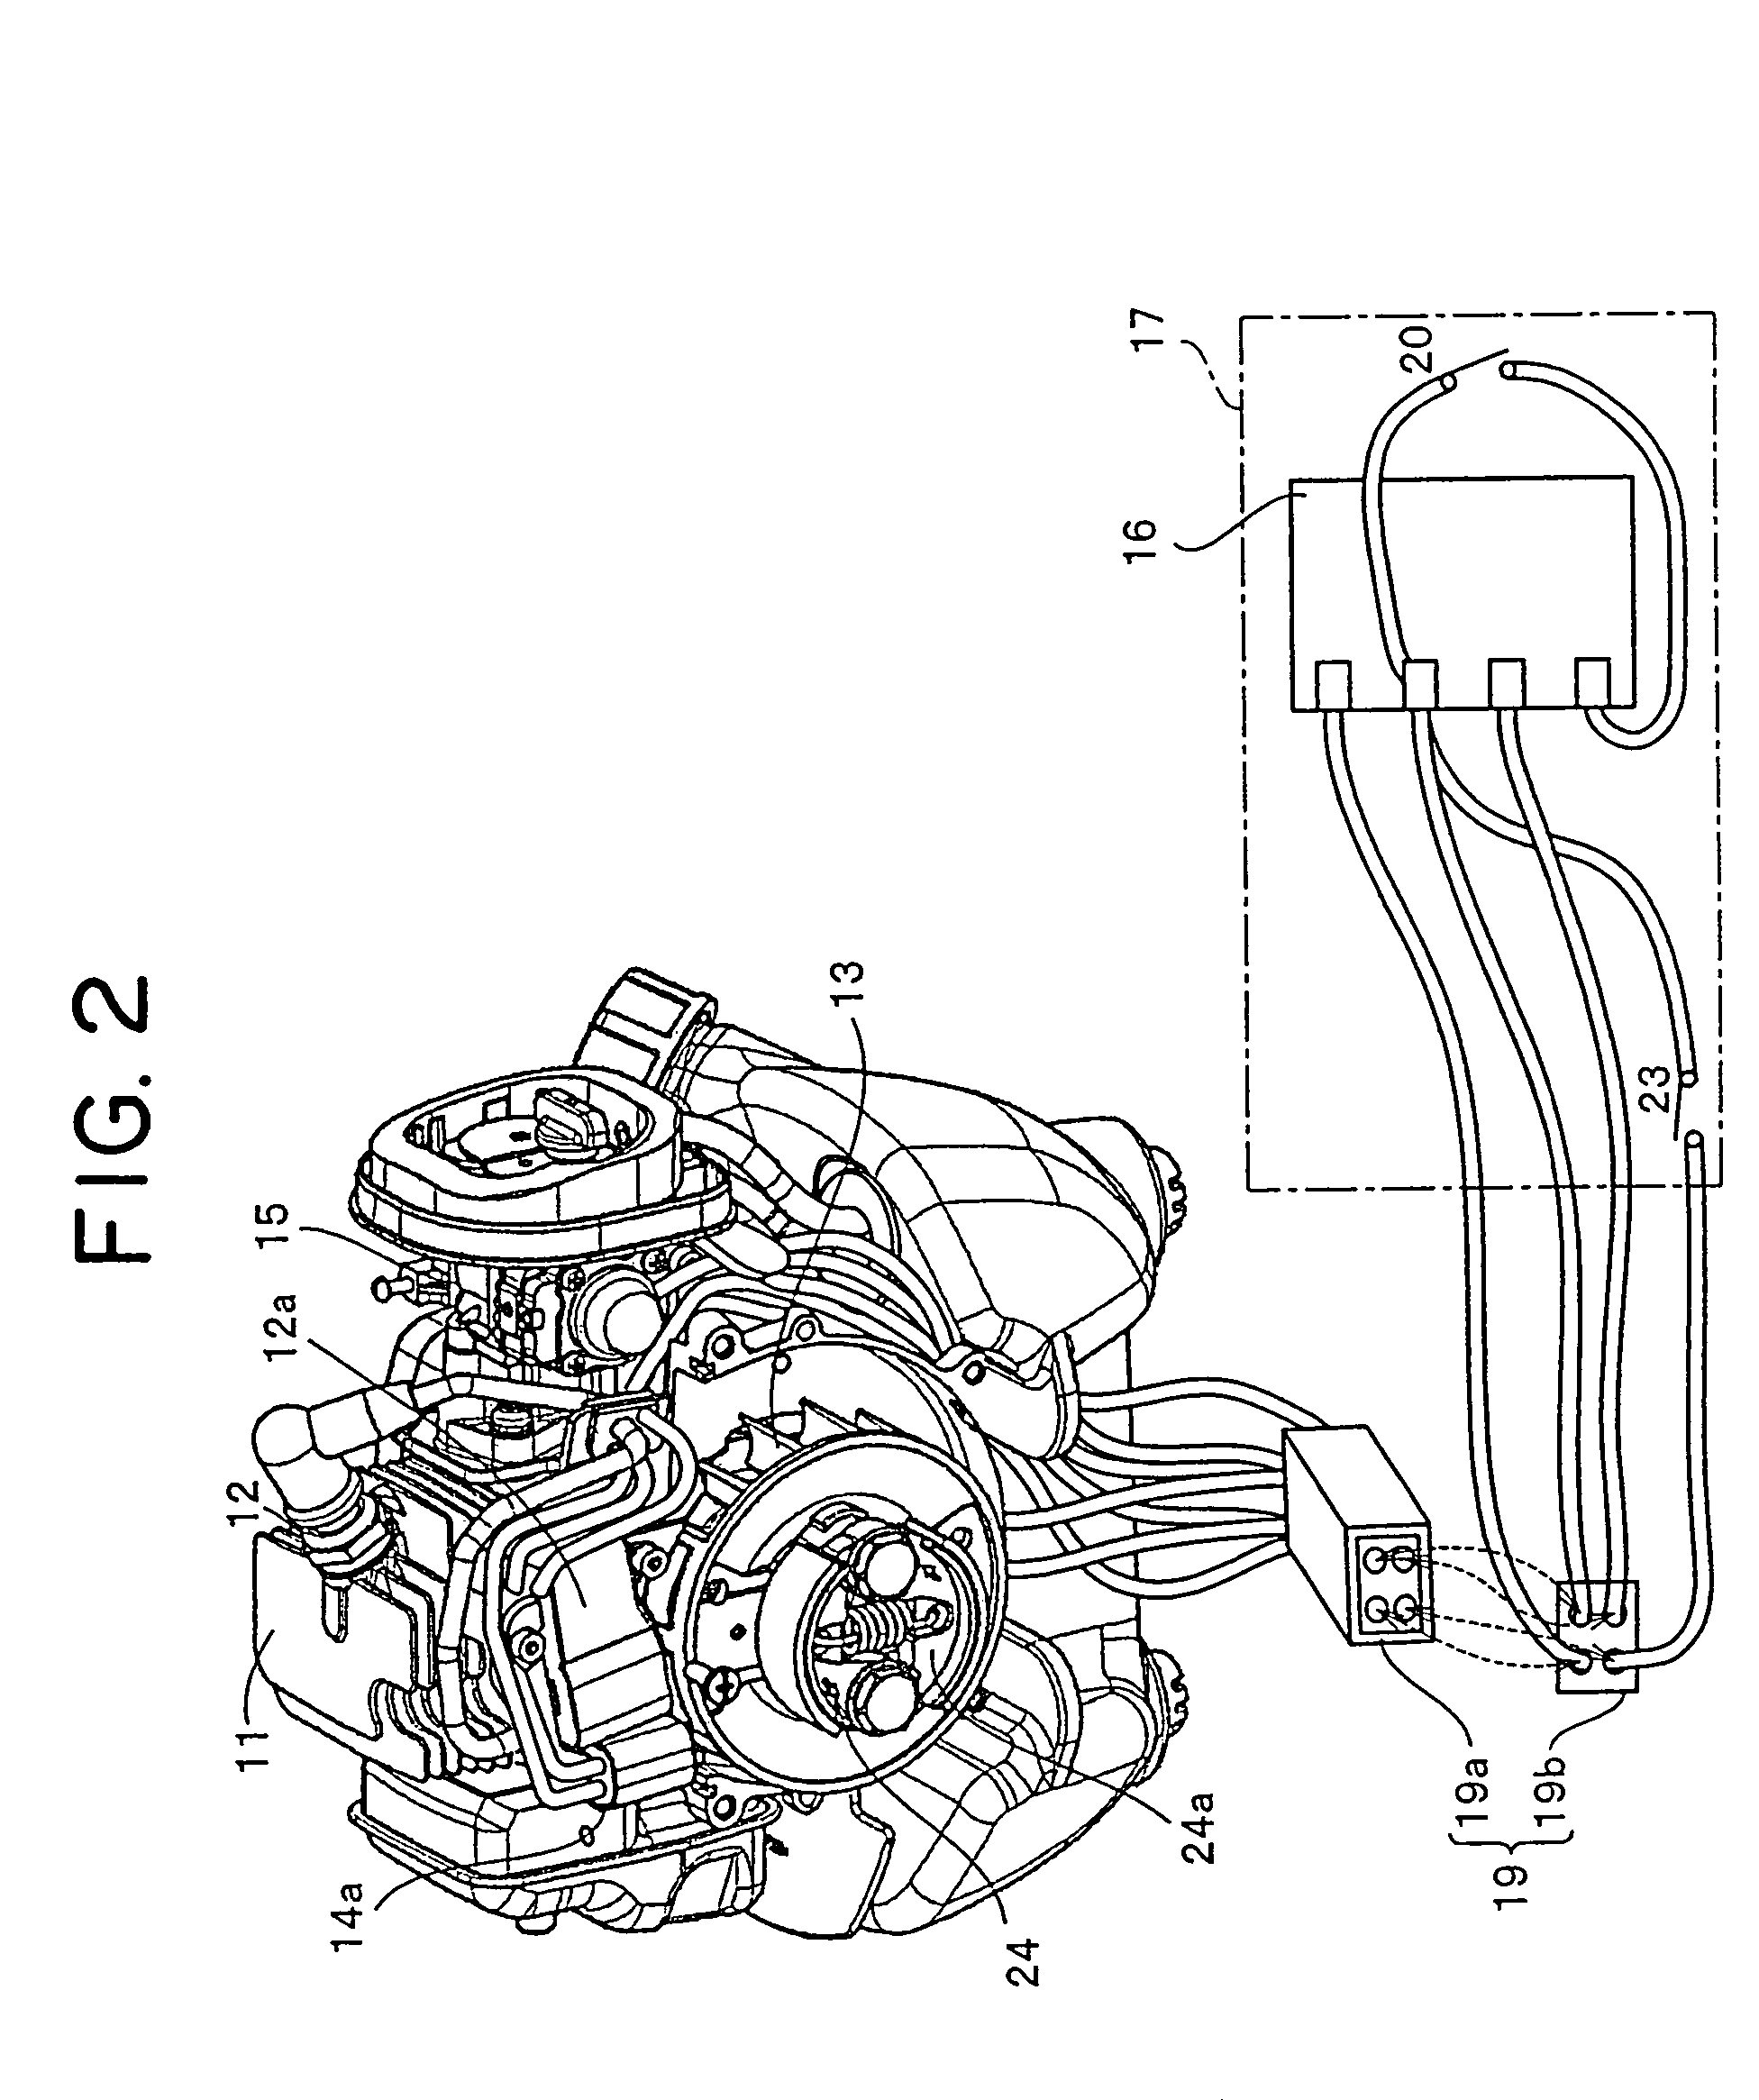 Battery pack for driving electric motor of compact engine starting device, engine starting device driven by the battery pack, and manual working machine having the engine starting device